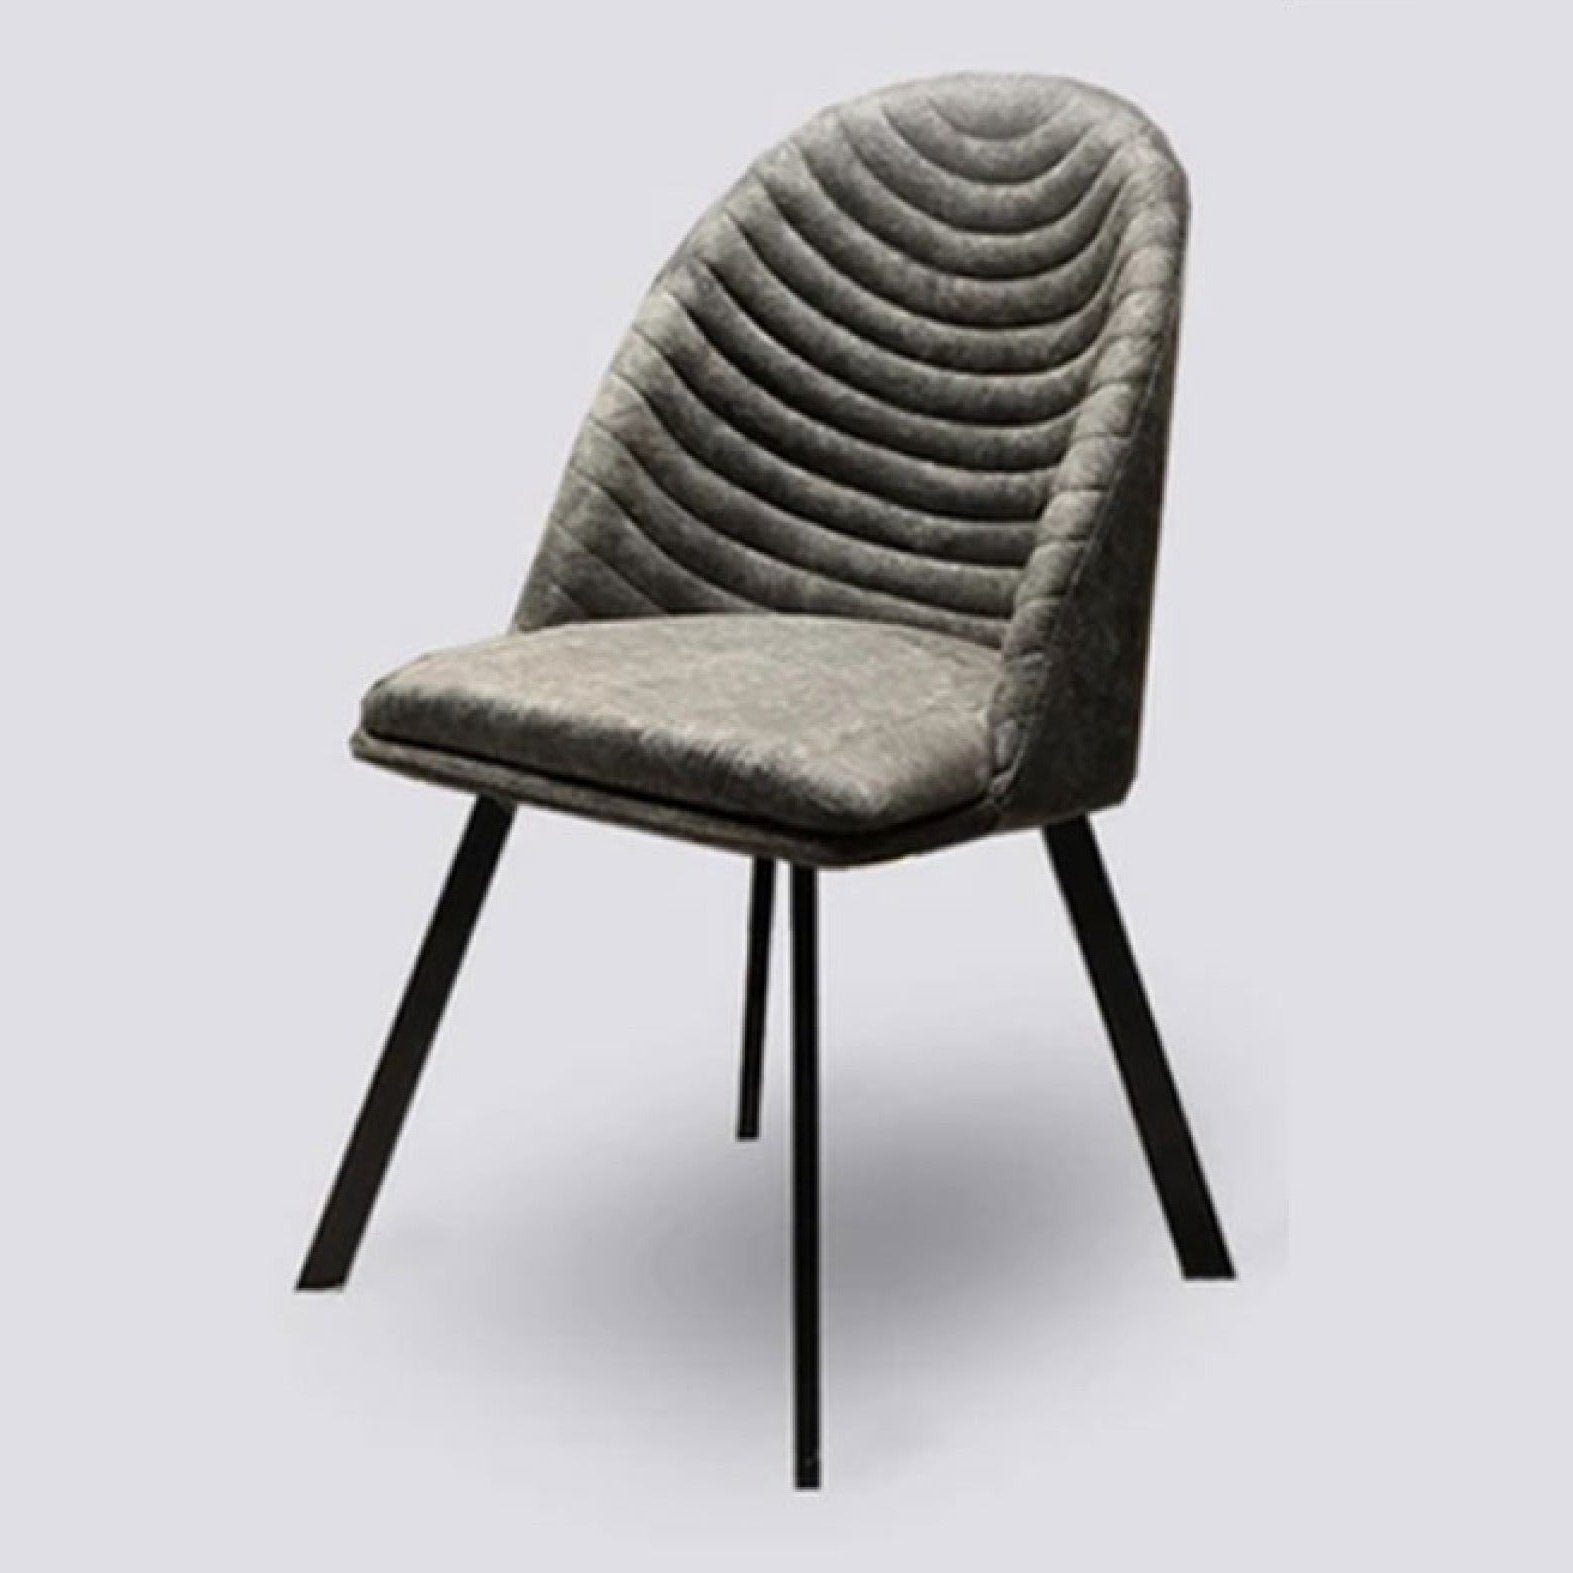 LUX-488 DINING CHAIR Mobel Furniture